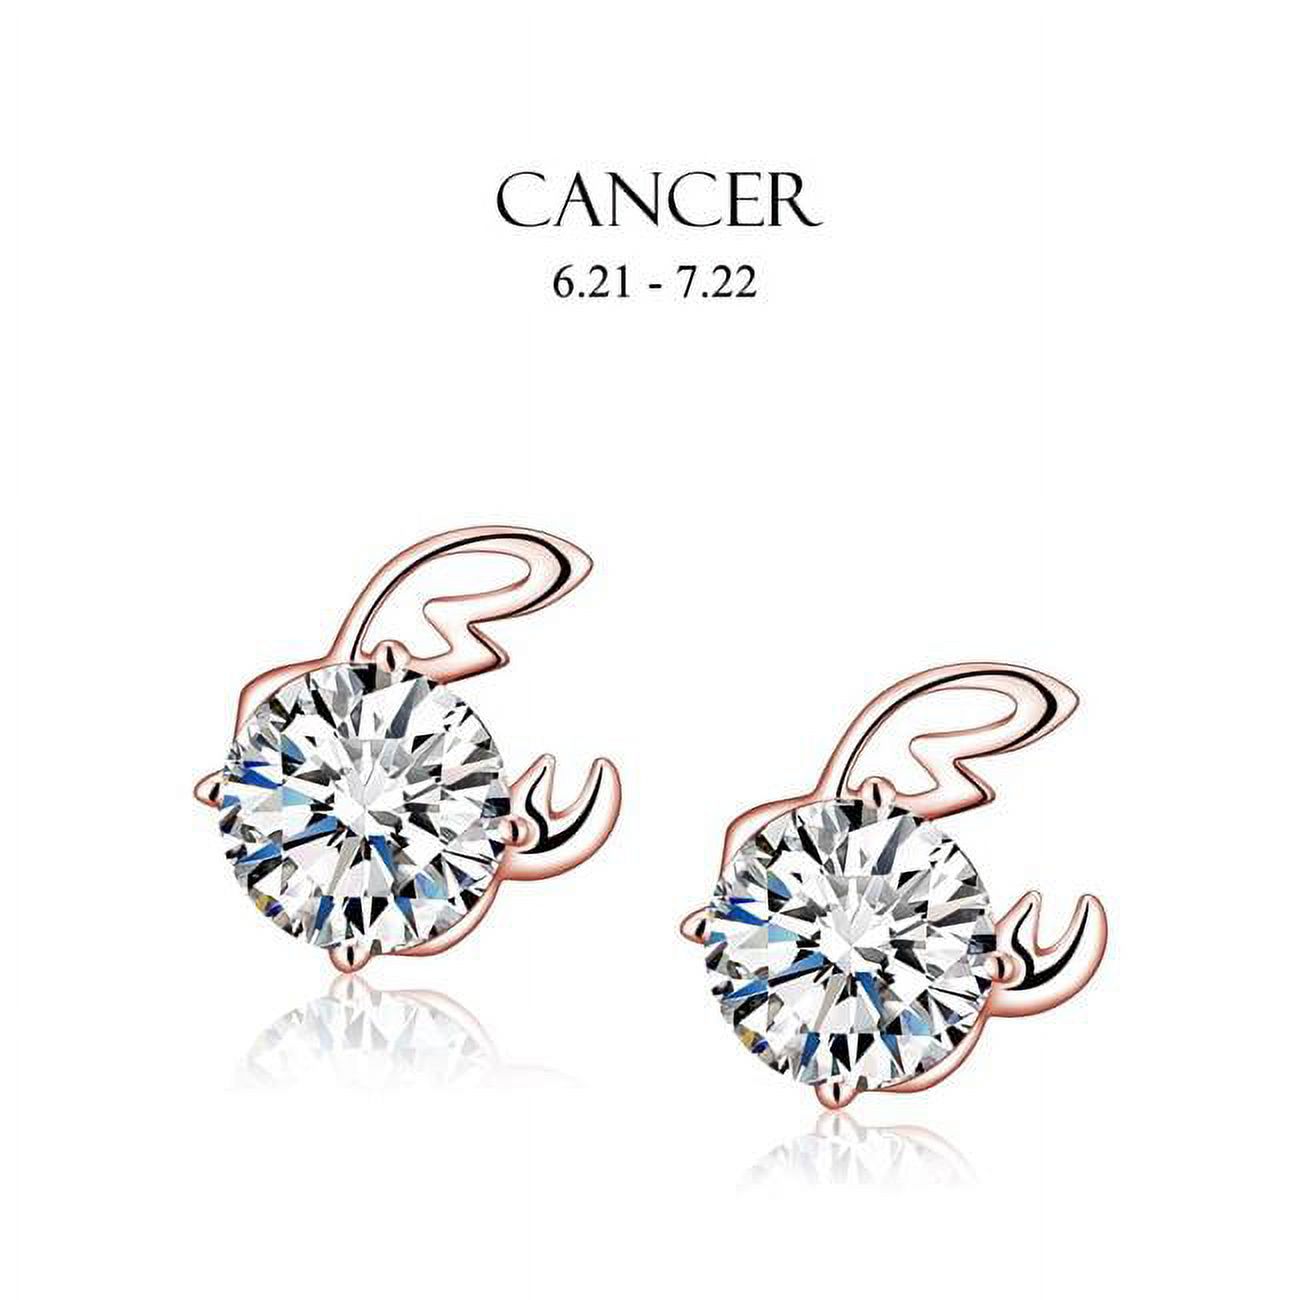 E-i2czcnr-rg Rose Gold Cubic Zirconia Cancer Stud Earrings